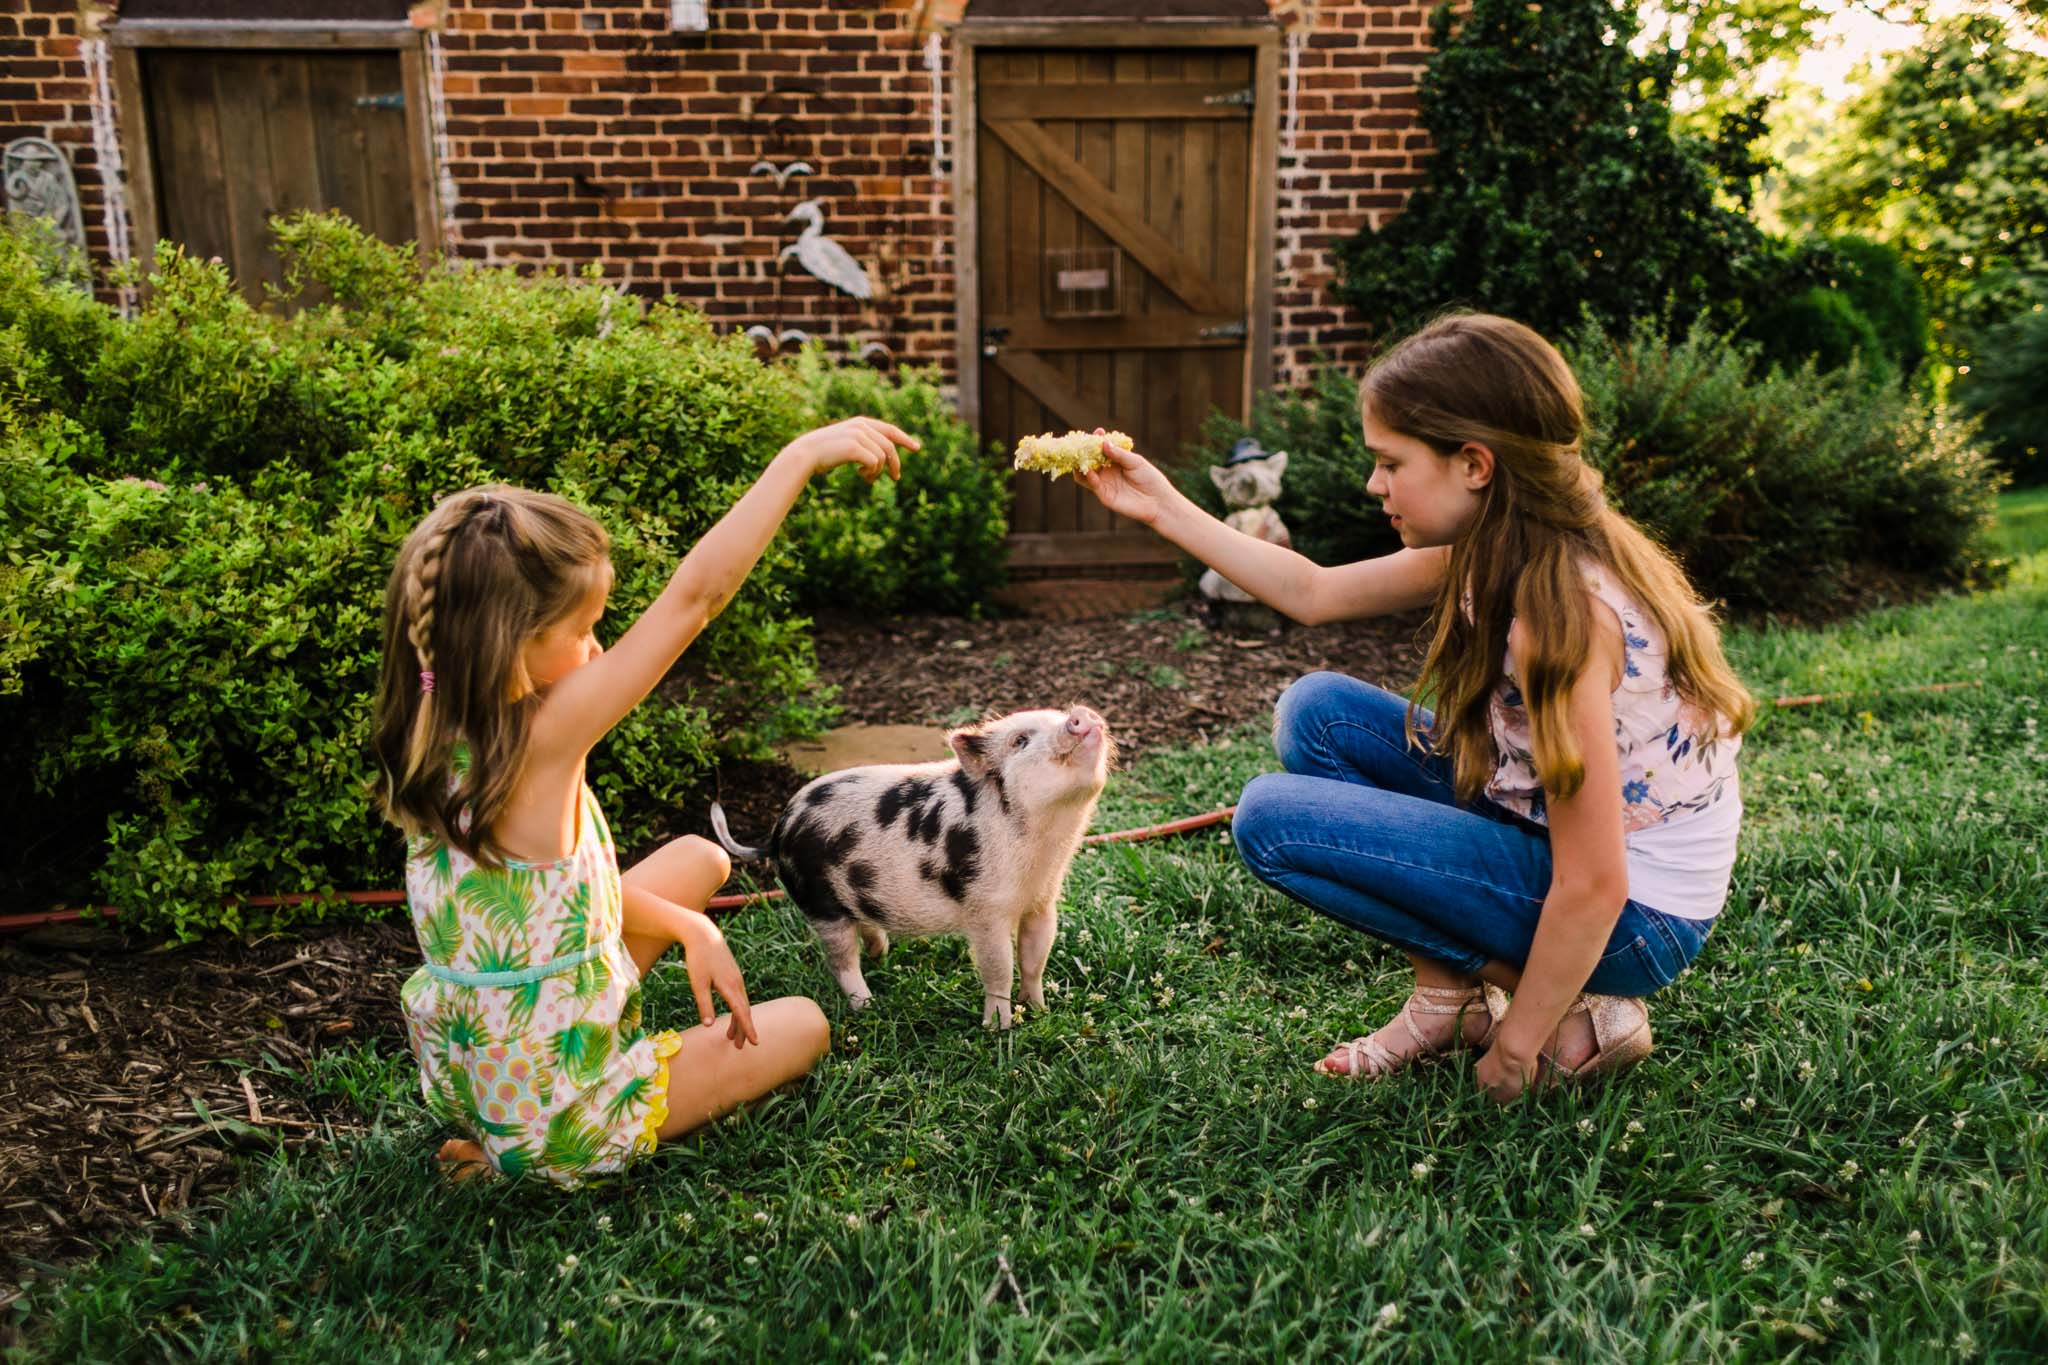 Durham Family Photographer | By G. Lin Photography | Girls playing with miniature pig